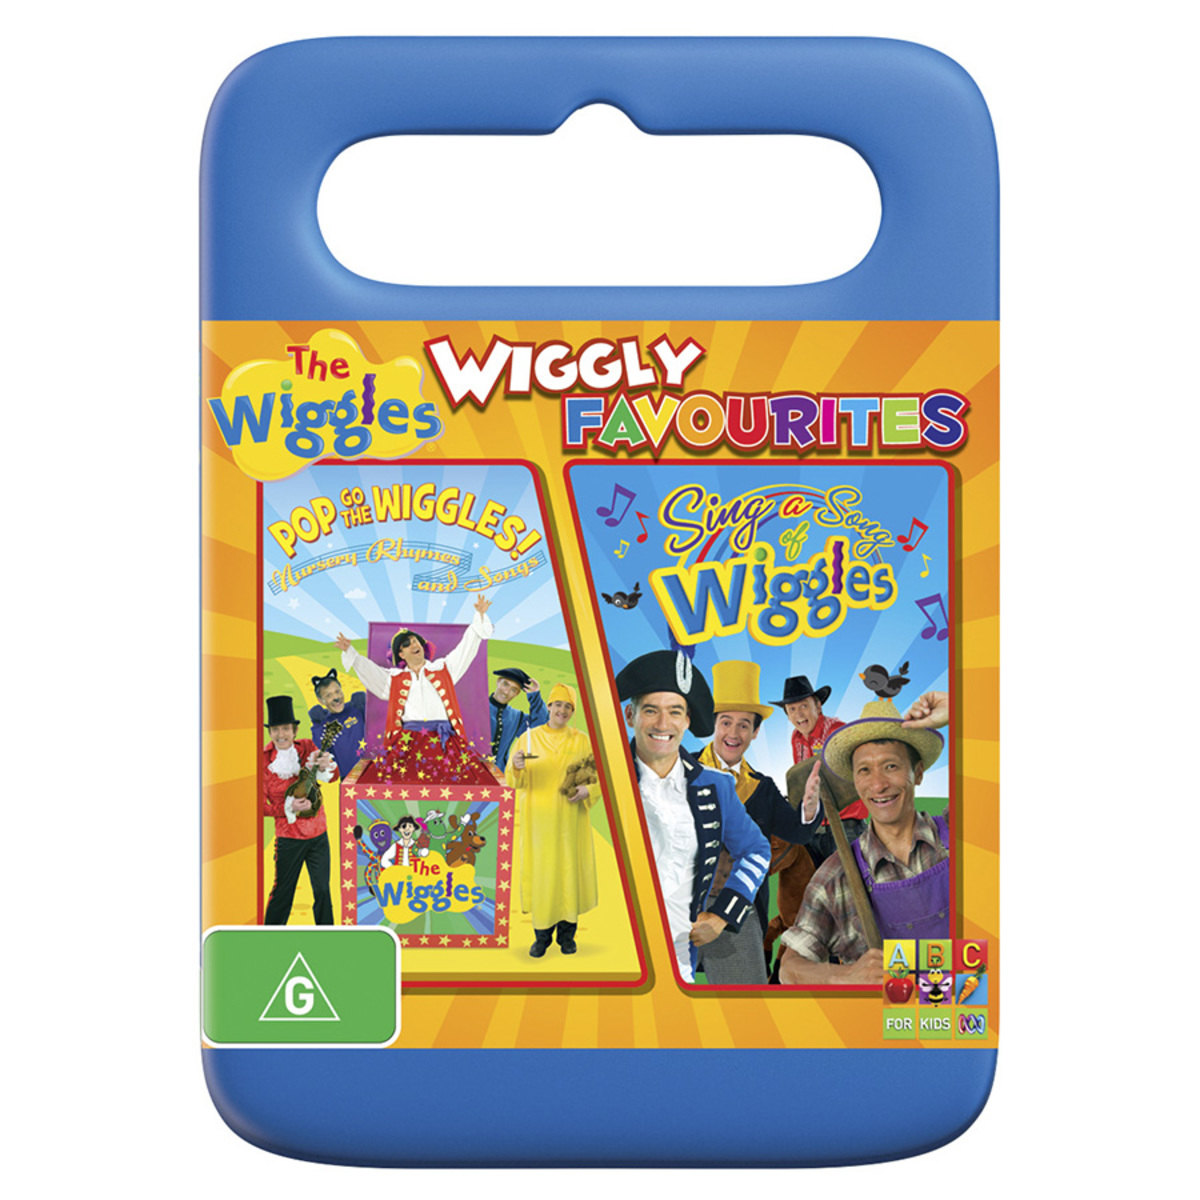 The Wiggles: Wiggly Favourites - DVD